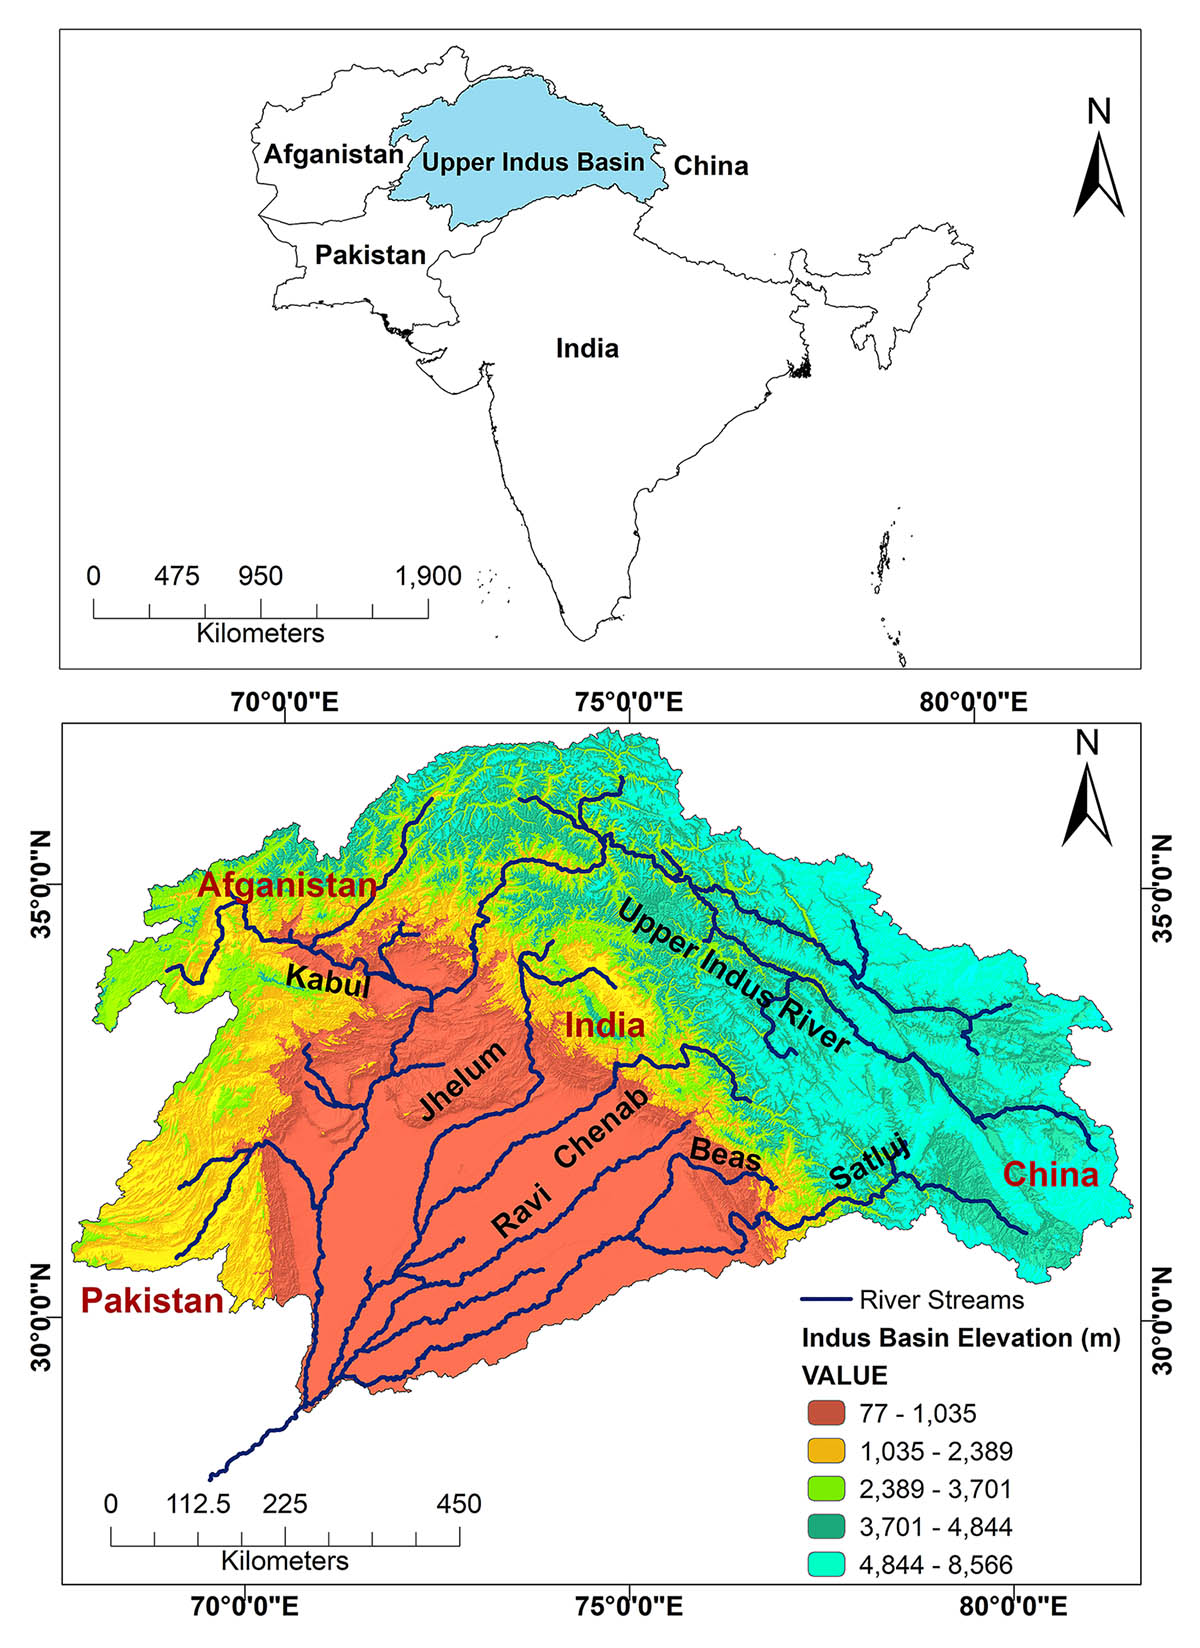 Study sets course for crucial social and natural science research in the Upper Indus Basin